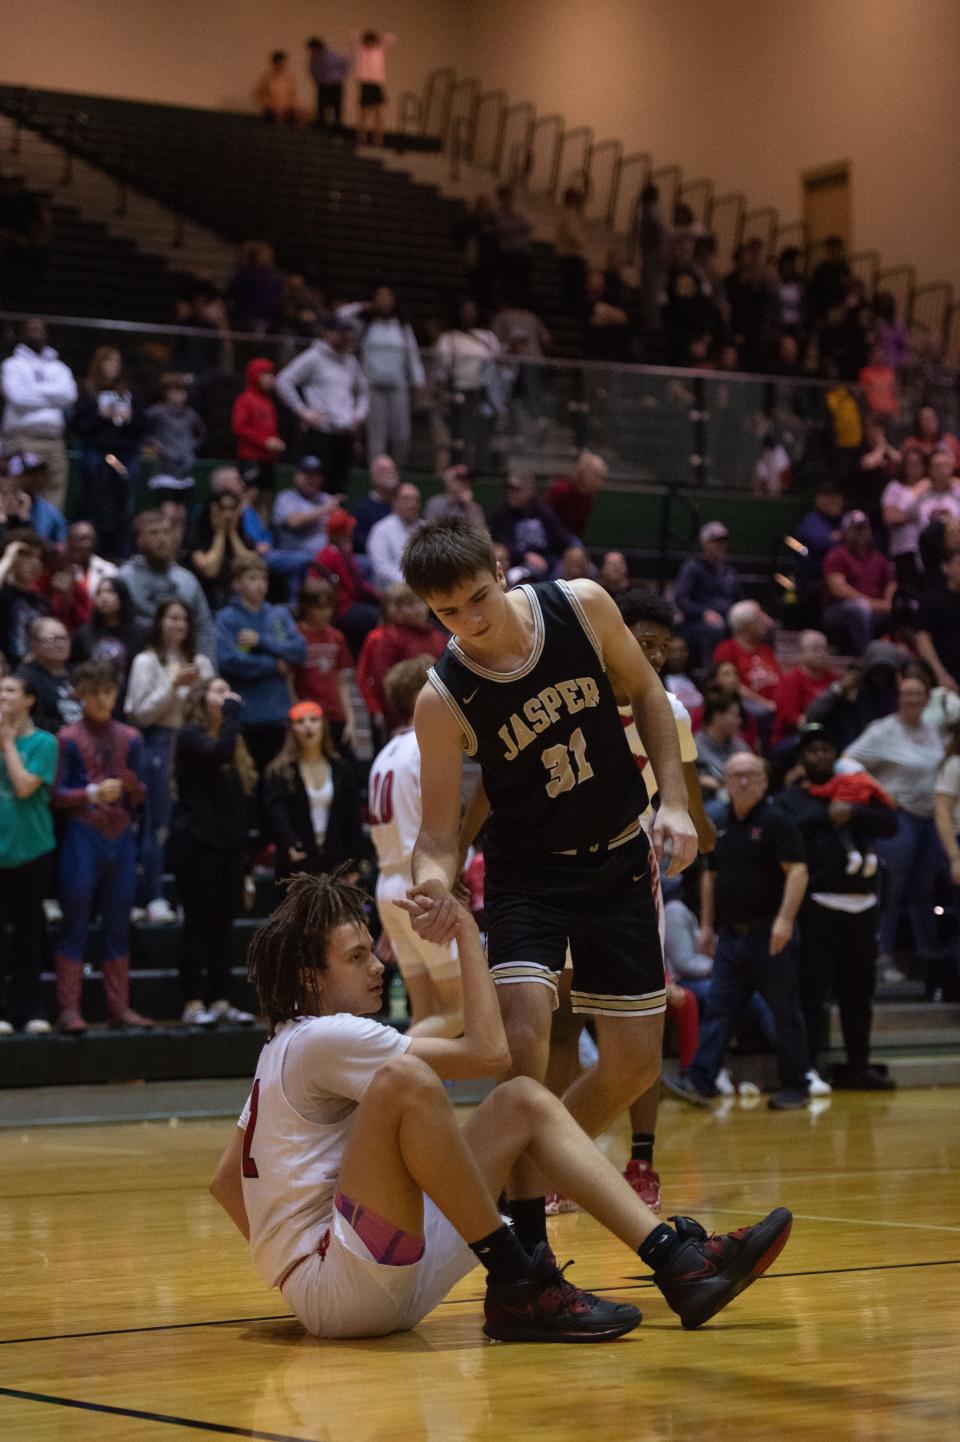 Jasper’s Andrew Noblitt (31) assists Harrison’s Jesiah Sloss (22) back to his feet after falling on the court during their game at North High School in Evansville, Ind., on Tuesday, Feb. 28, 2023.